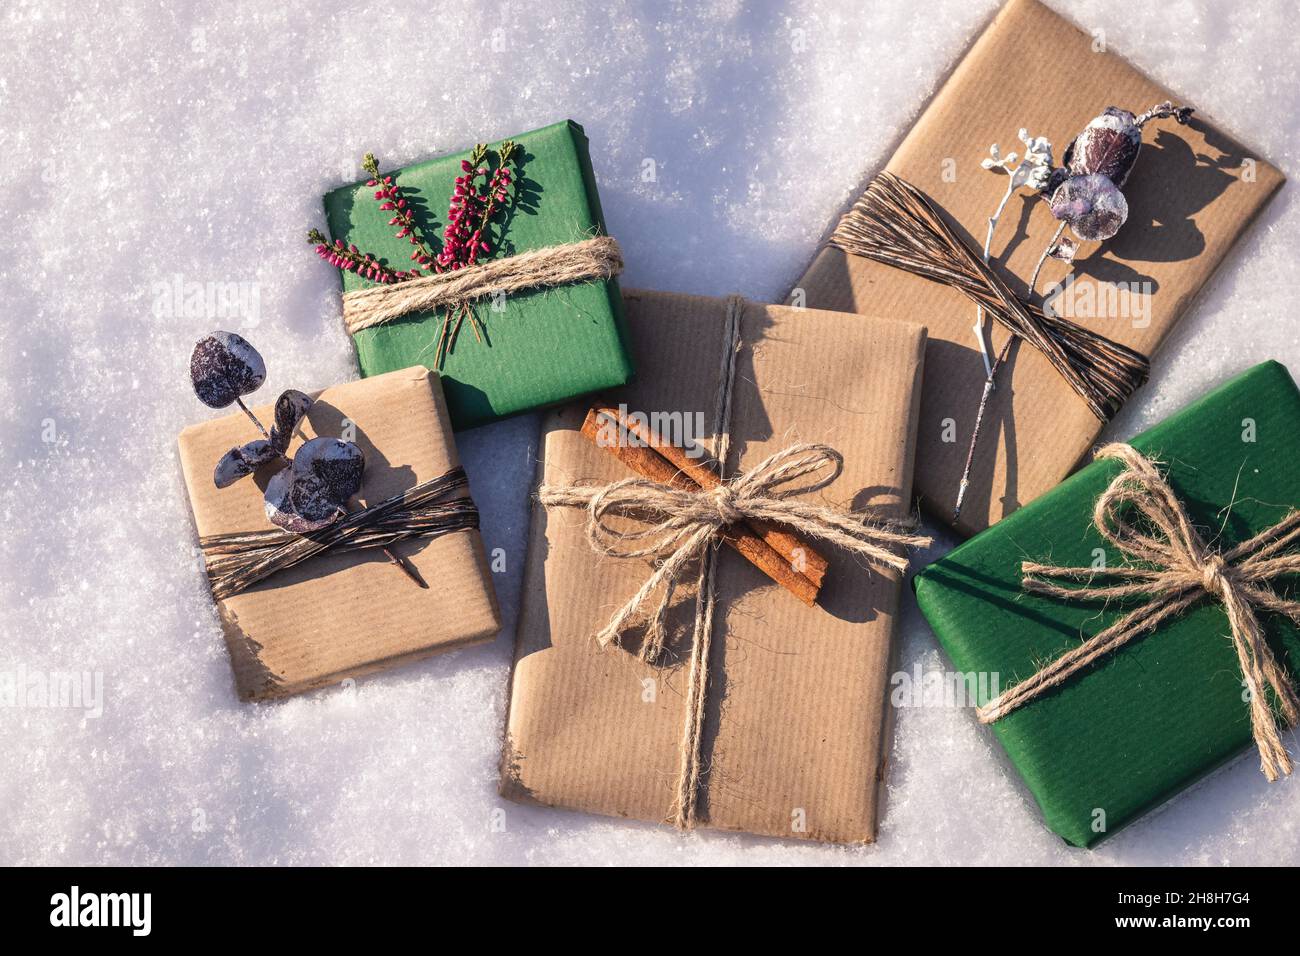 Wrapped Christmas presents with decoration in snow. Flat lay of gift boxes  in green and brown kraft wrapping paper Stock Photo - Alamy